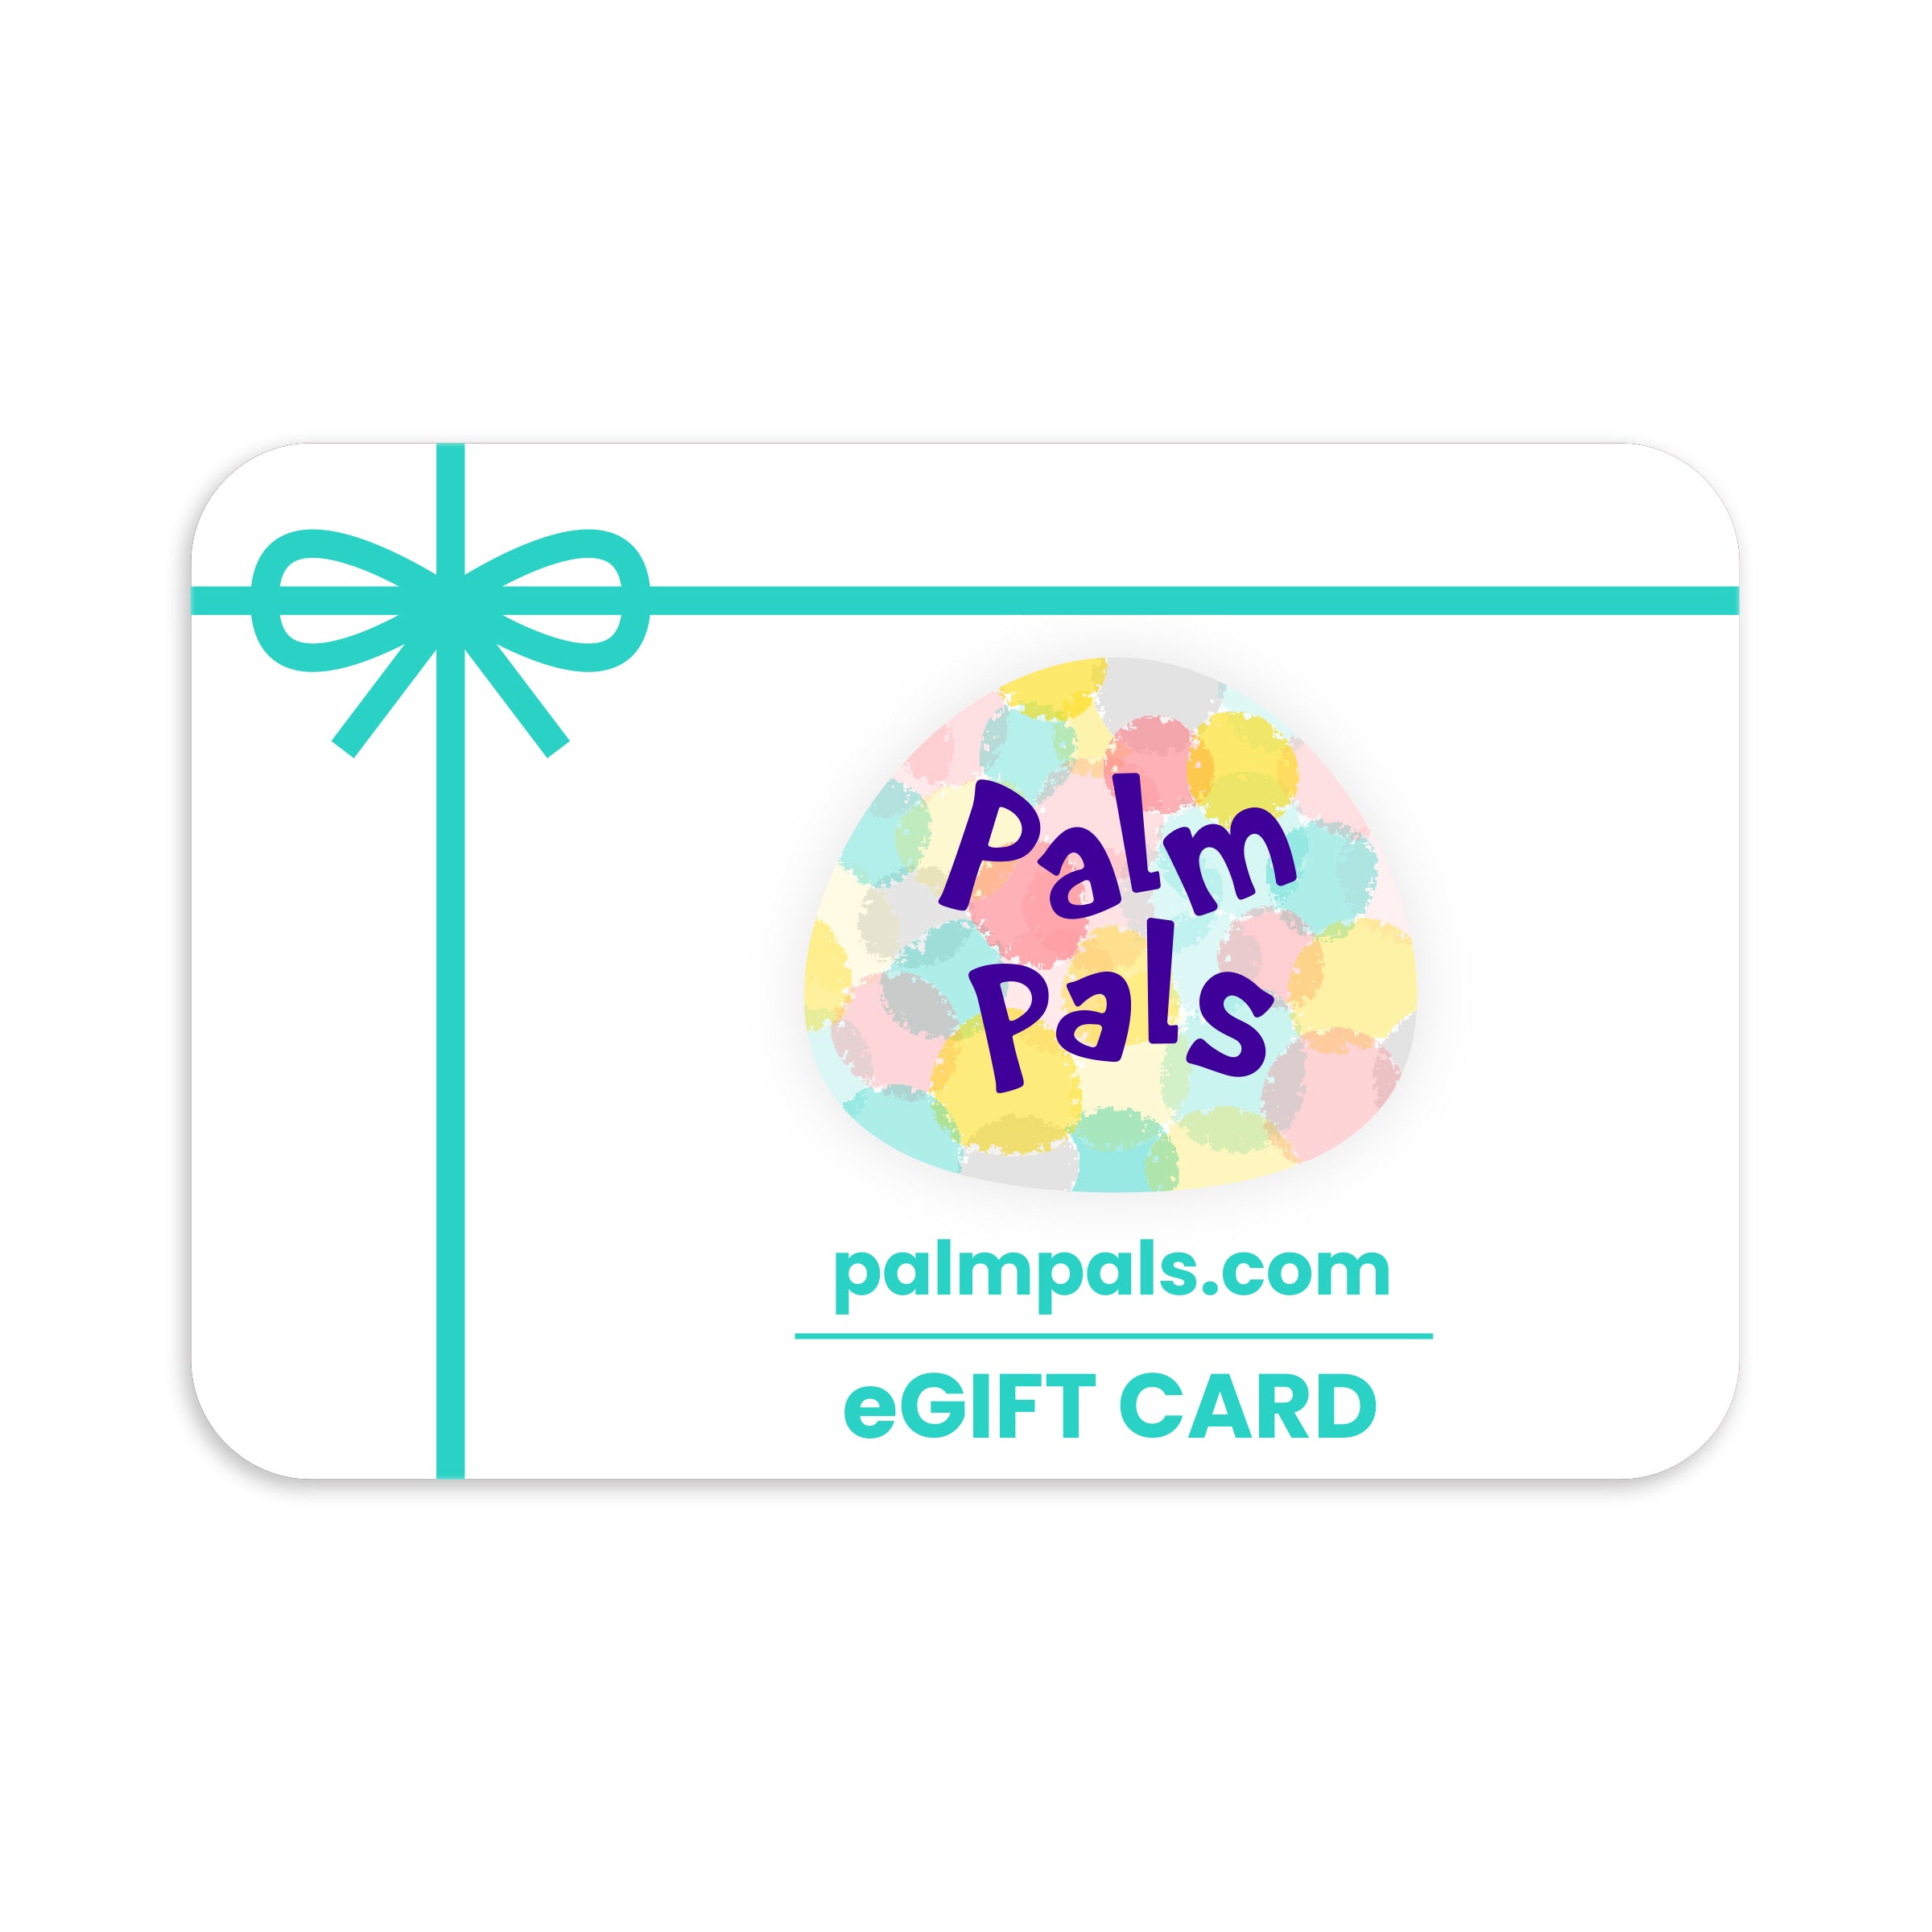 Palm Pals Gift Card